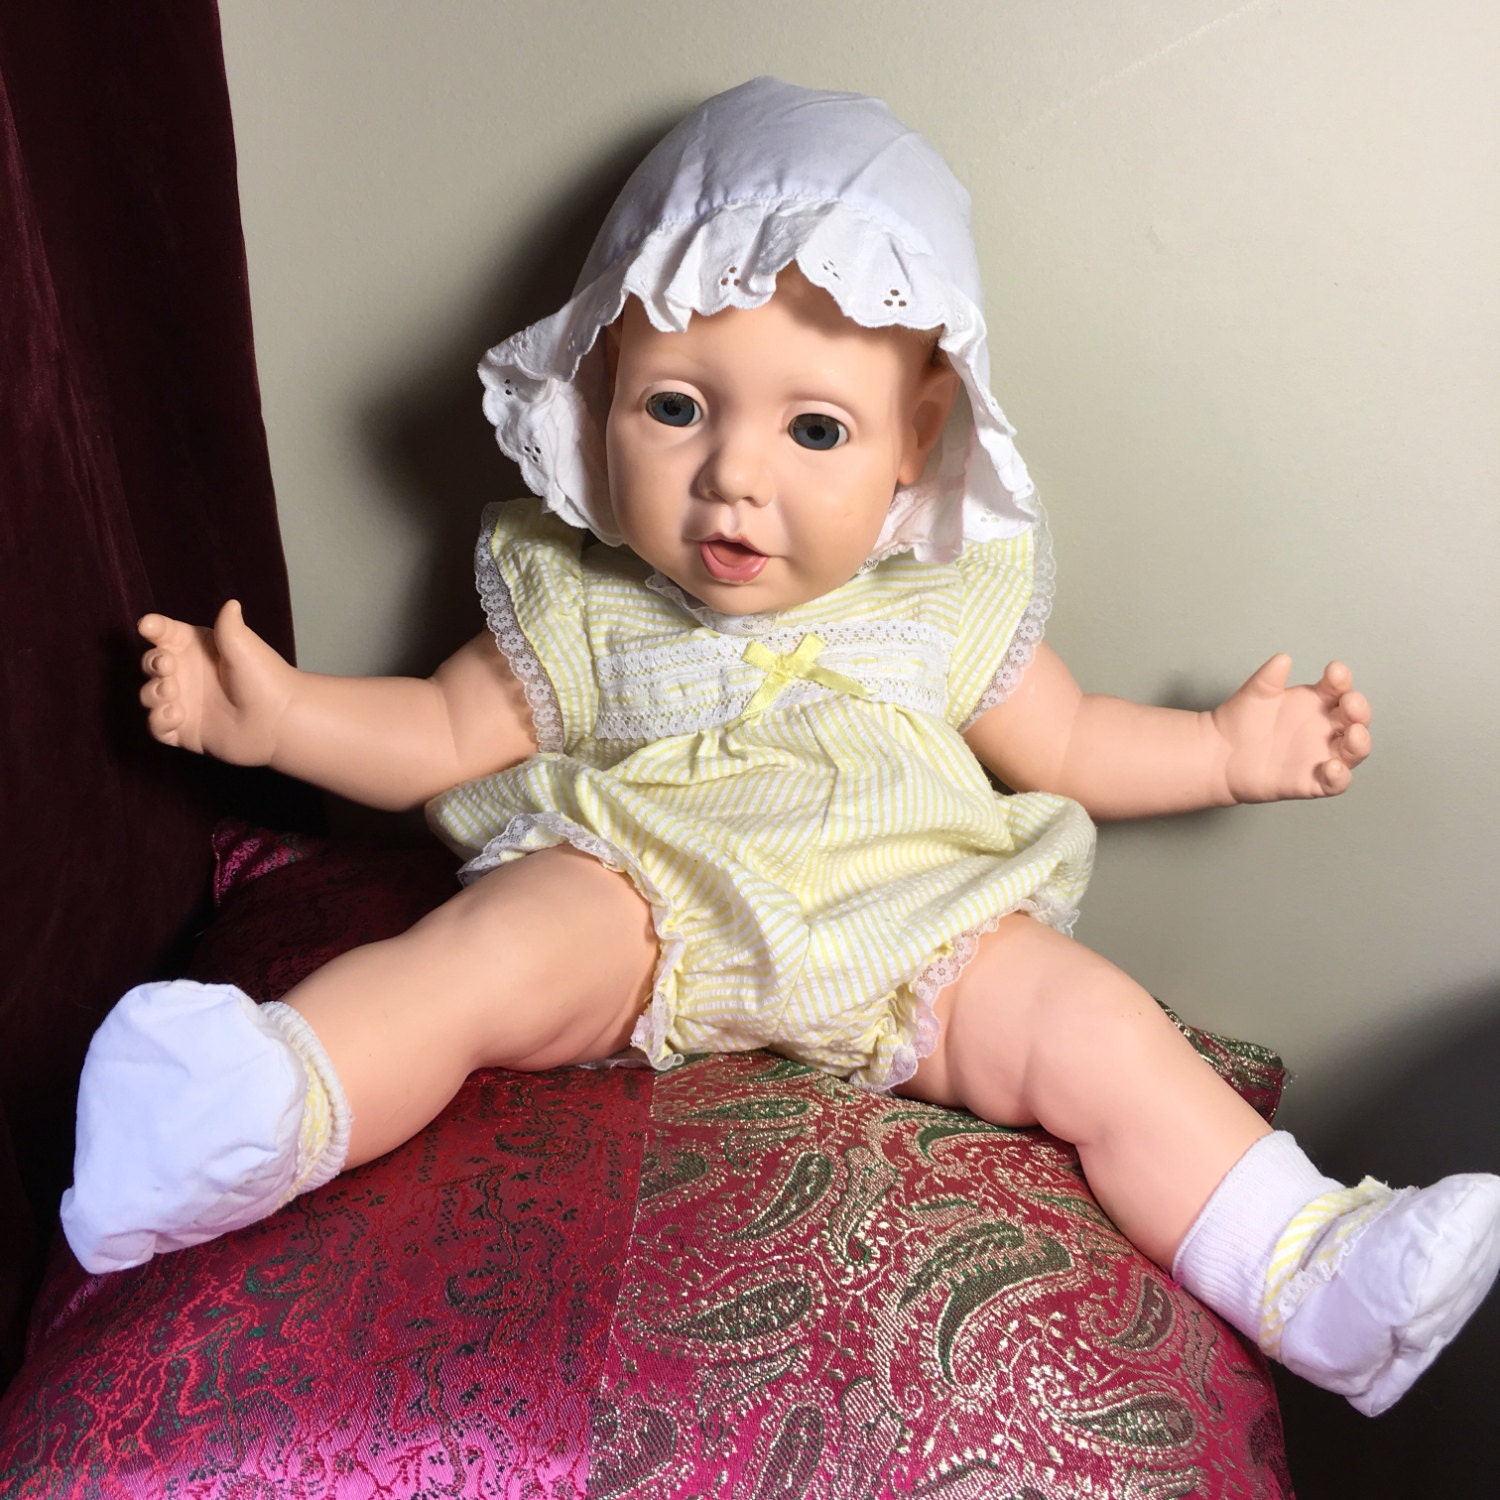 Vintage 1985 Hasbro Real Baby Doll with Original Outfit